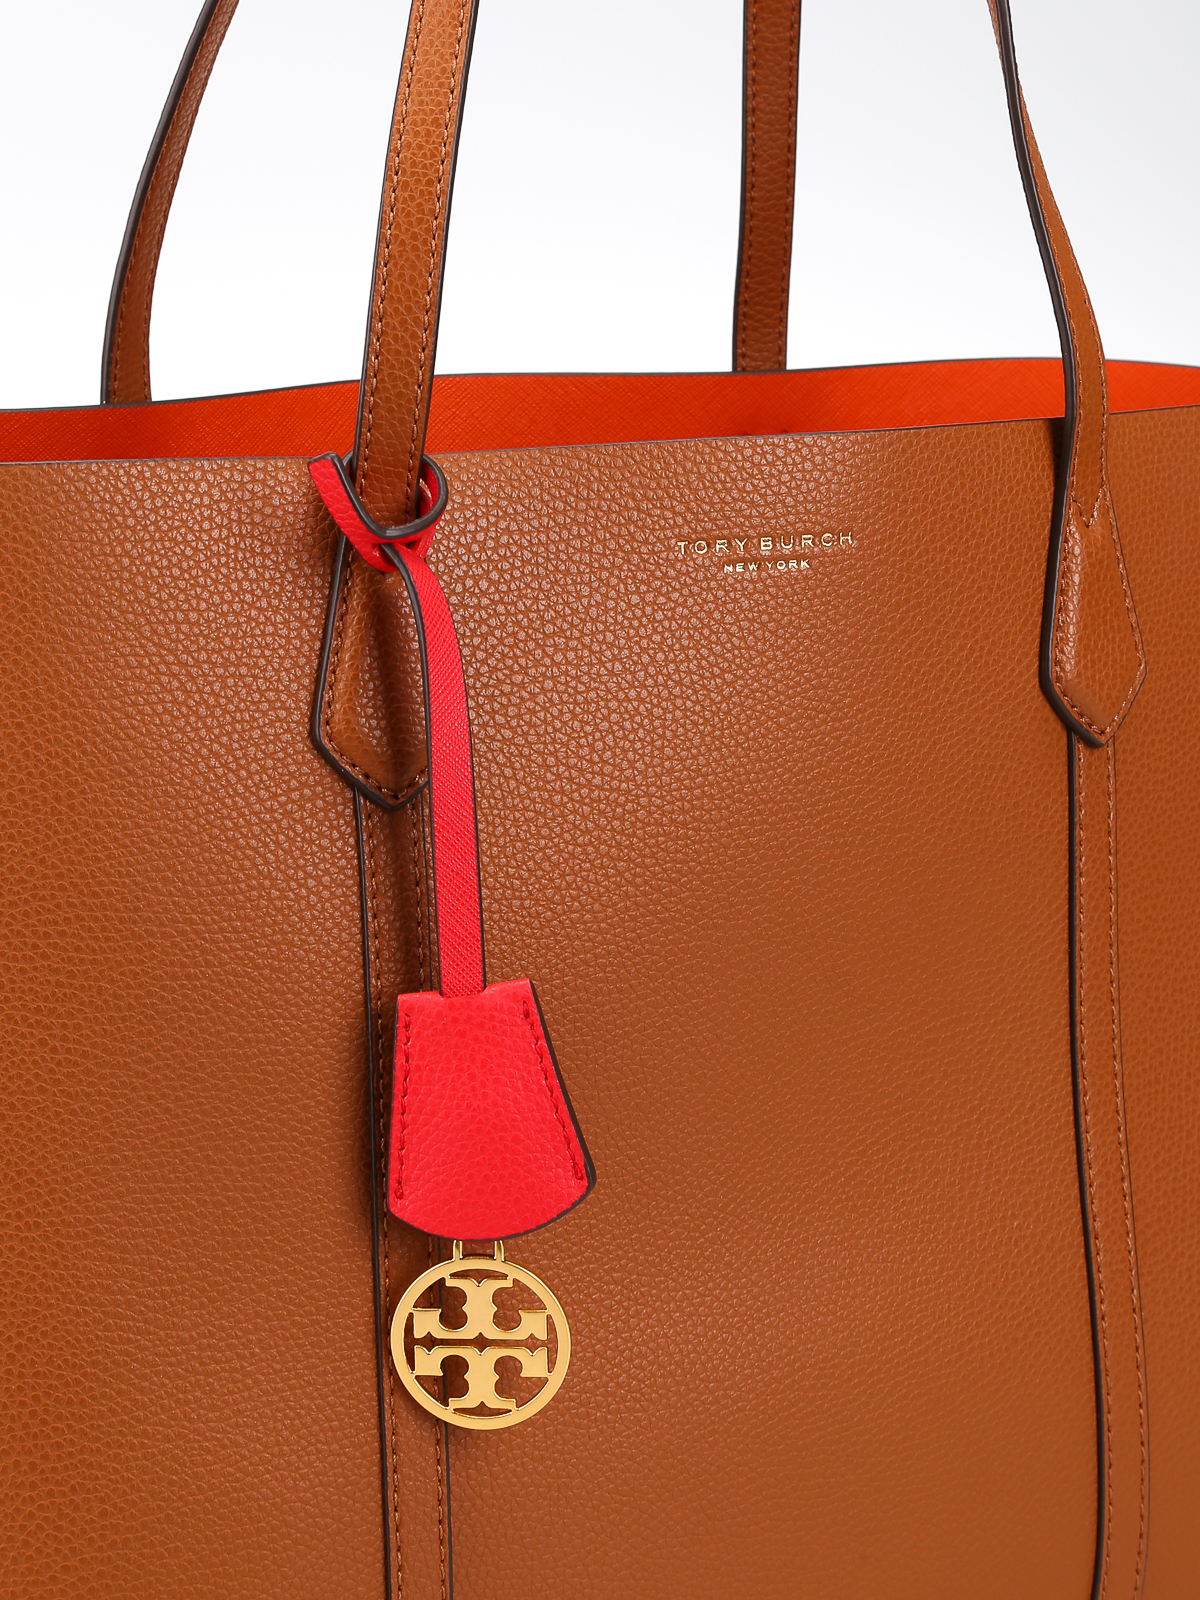 tory burch perry tote triple compartment